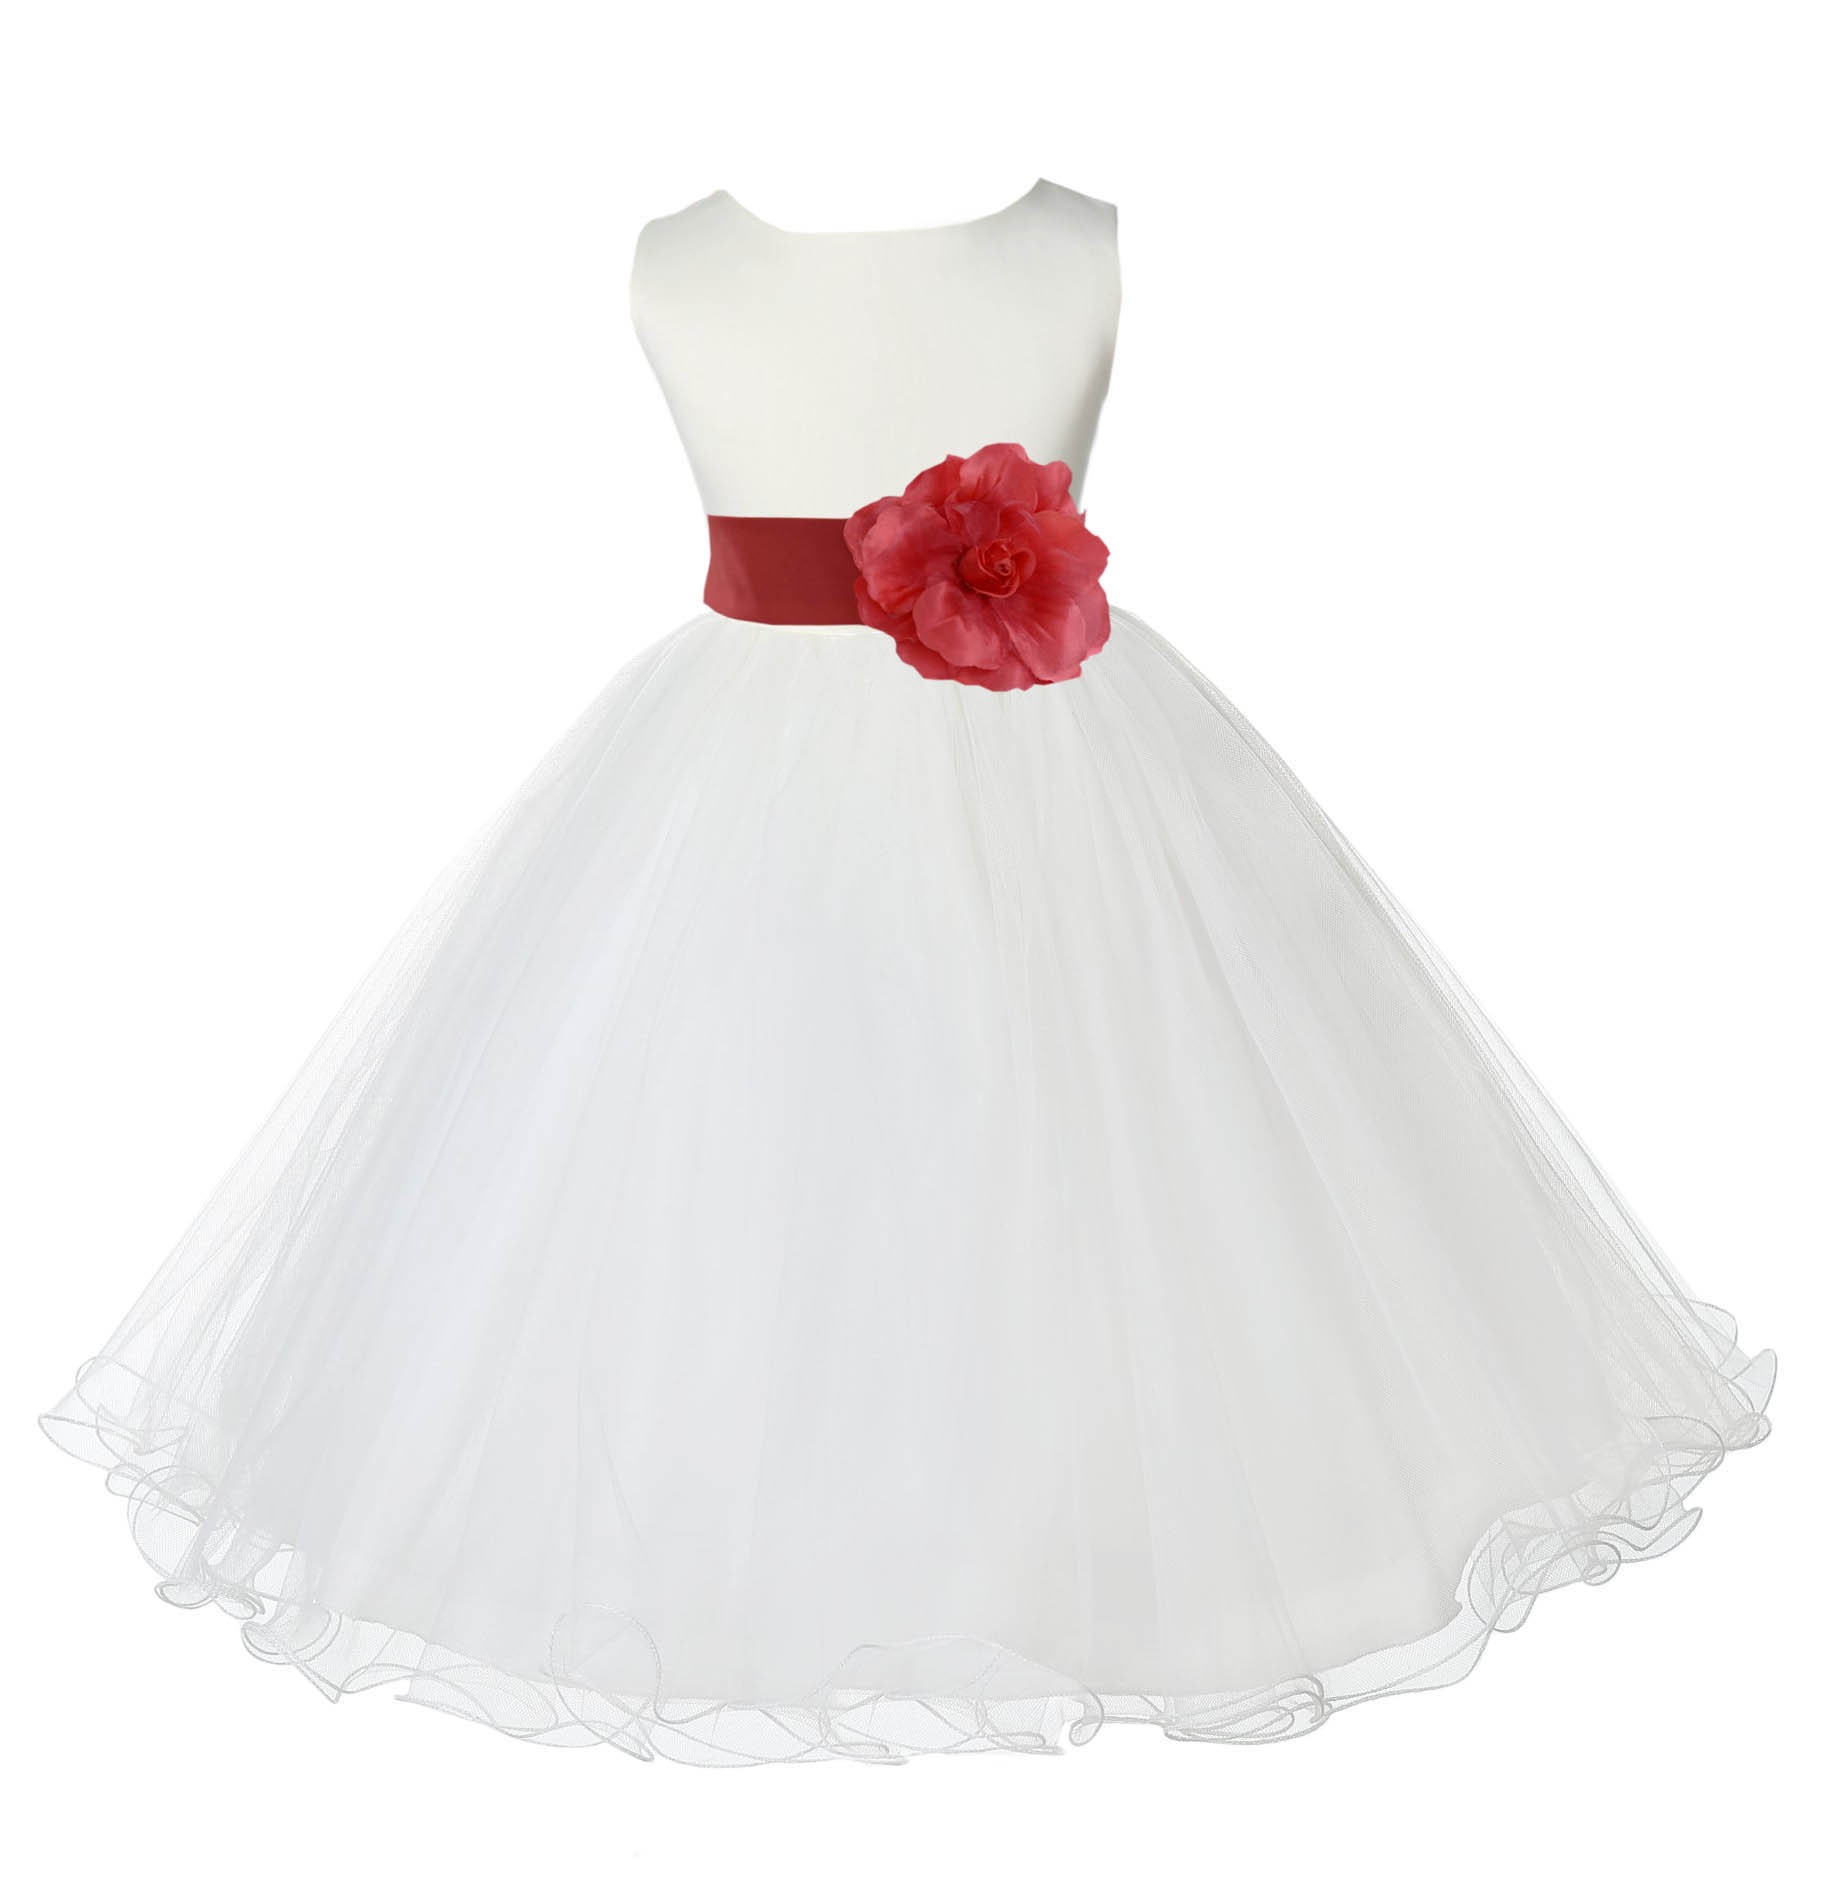 Ivory/Guava Tulle Rattail Edge Flower Girl Dress Pageant Recital 829S